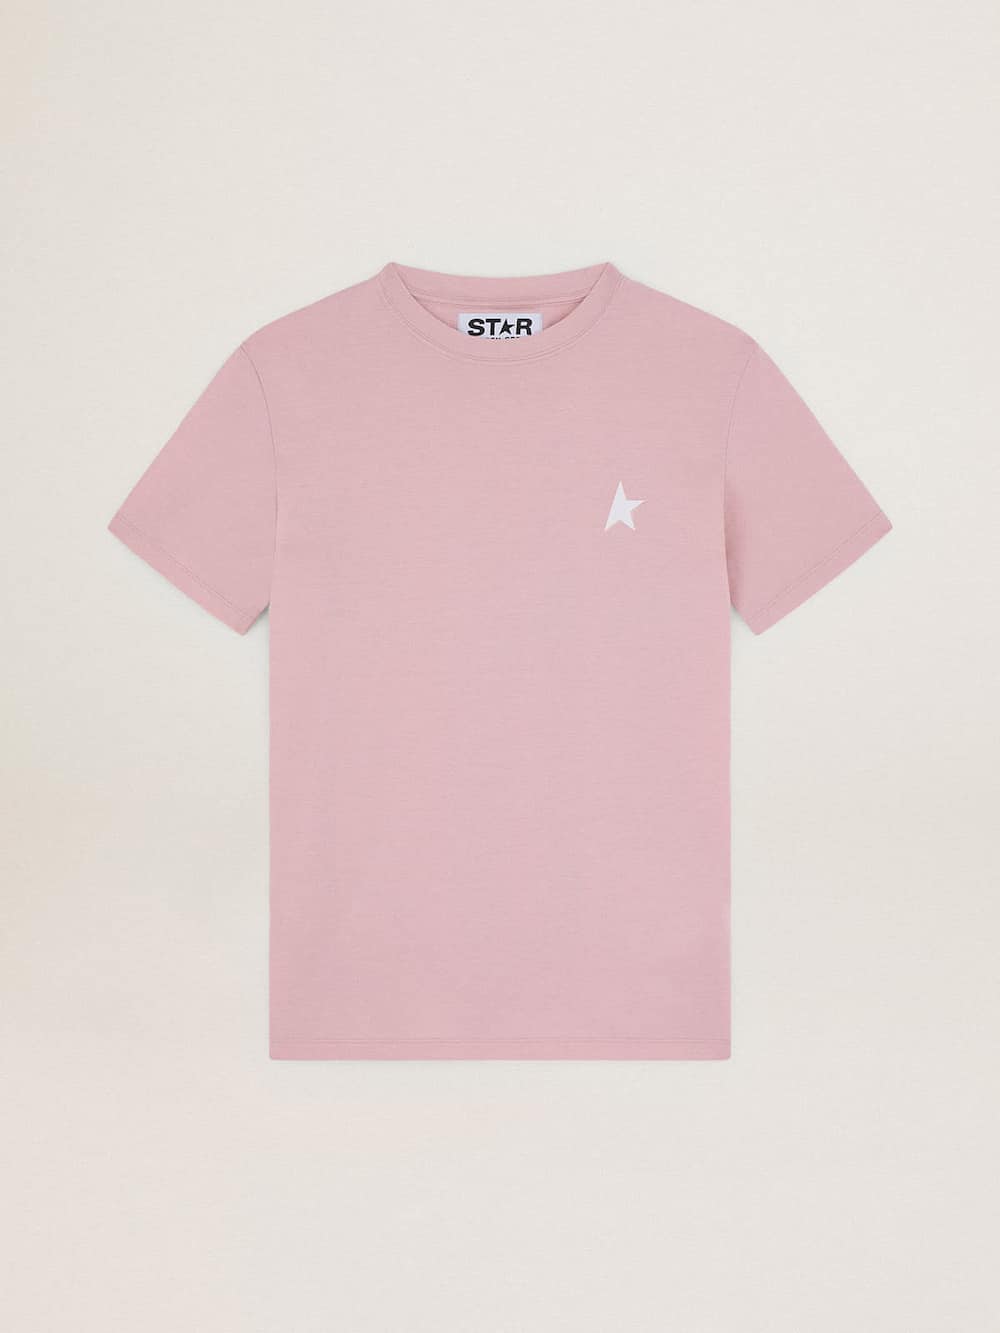 Golden Goose - Women's lavender pink T-shirt with white star on the front in 